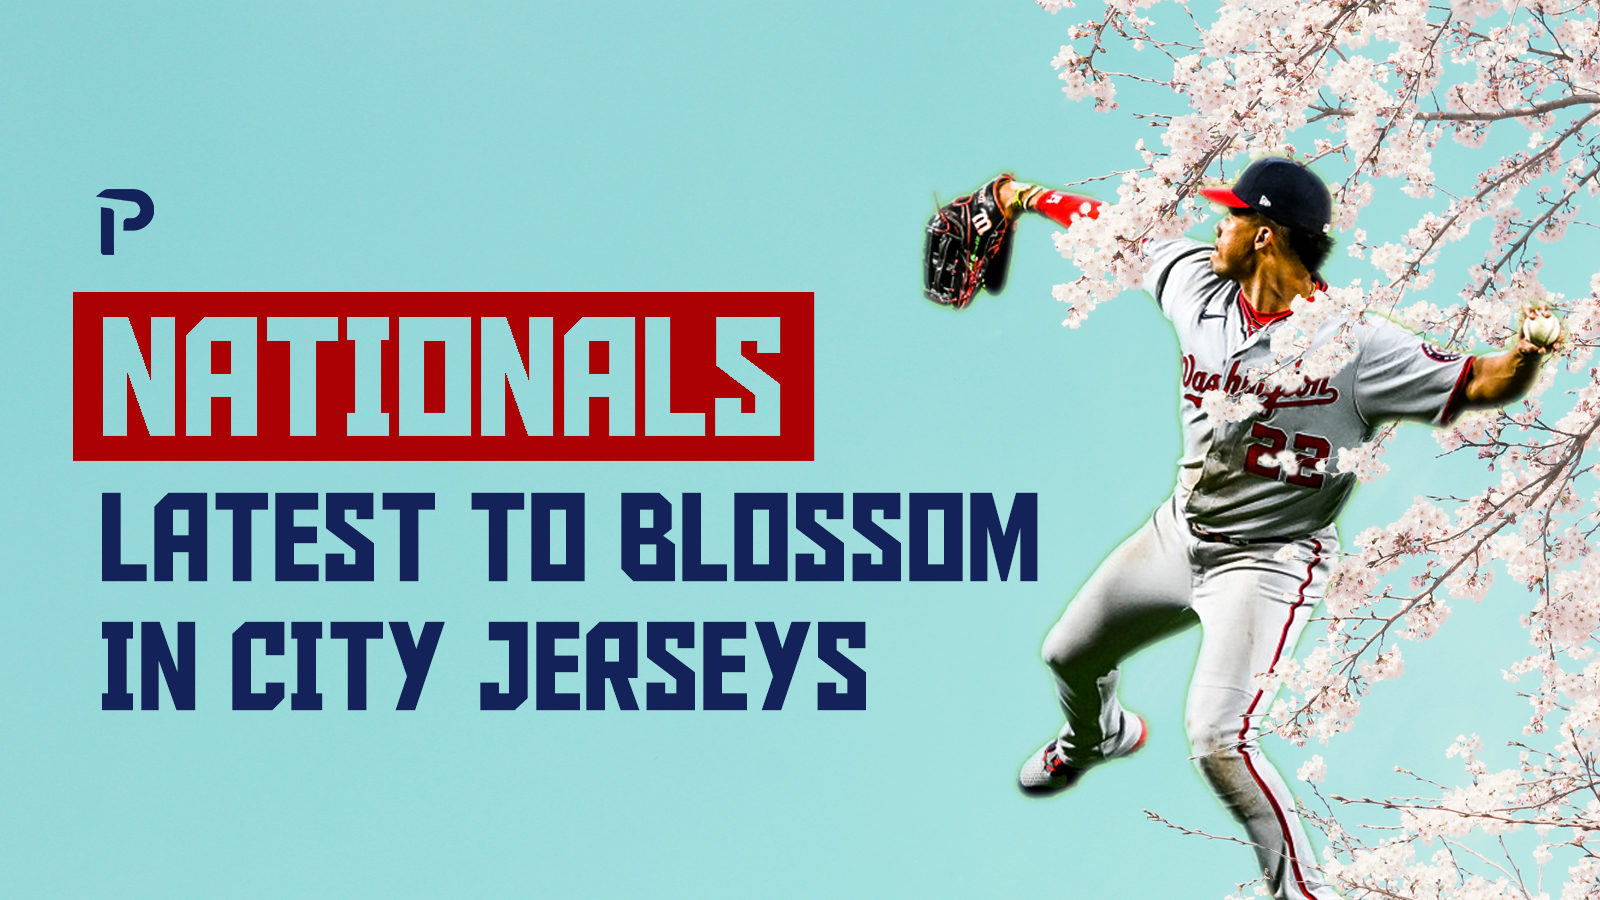 Washington Nationals and Wizards Debut Cherry Blossom-Themed Uniforms